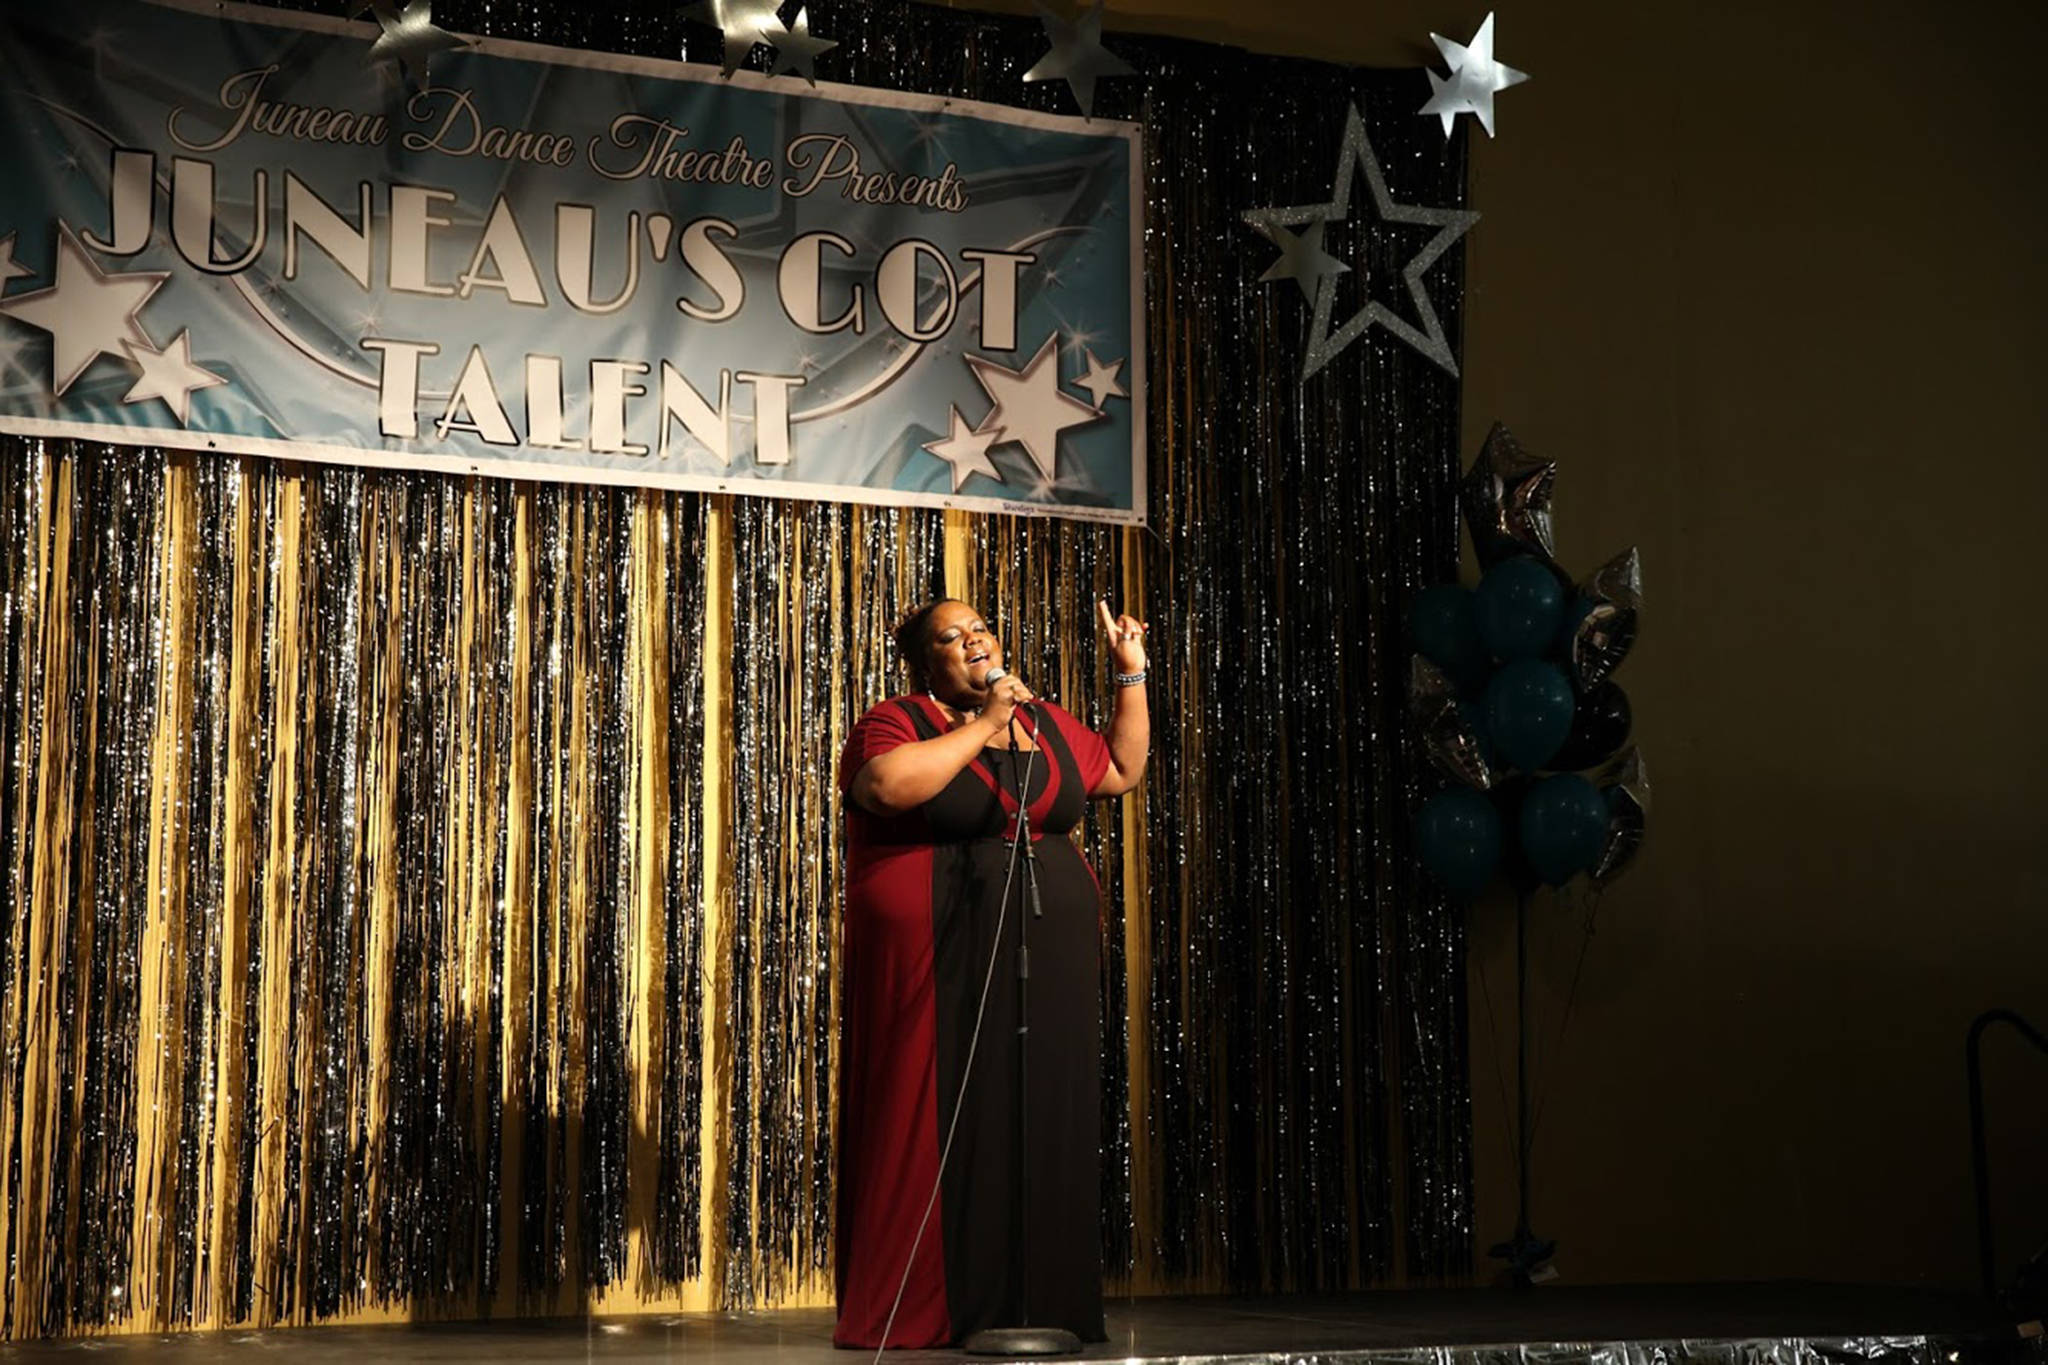 Jocelyn Miles performs during the 2016 Juneau’s Got Talent contest. Miles would go on to win. Auditions for the 2019 contest will be Dec. 17 and Dec. 18. (Diane Antaya | Courtesy photo for Juneau Dance Theatre)